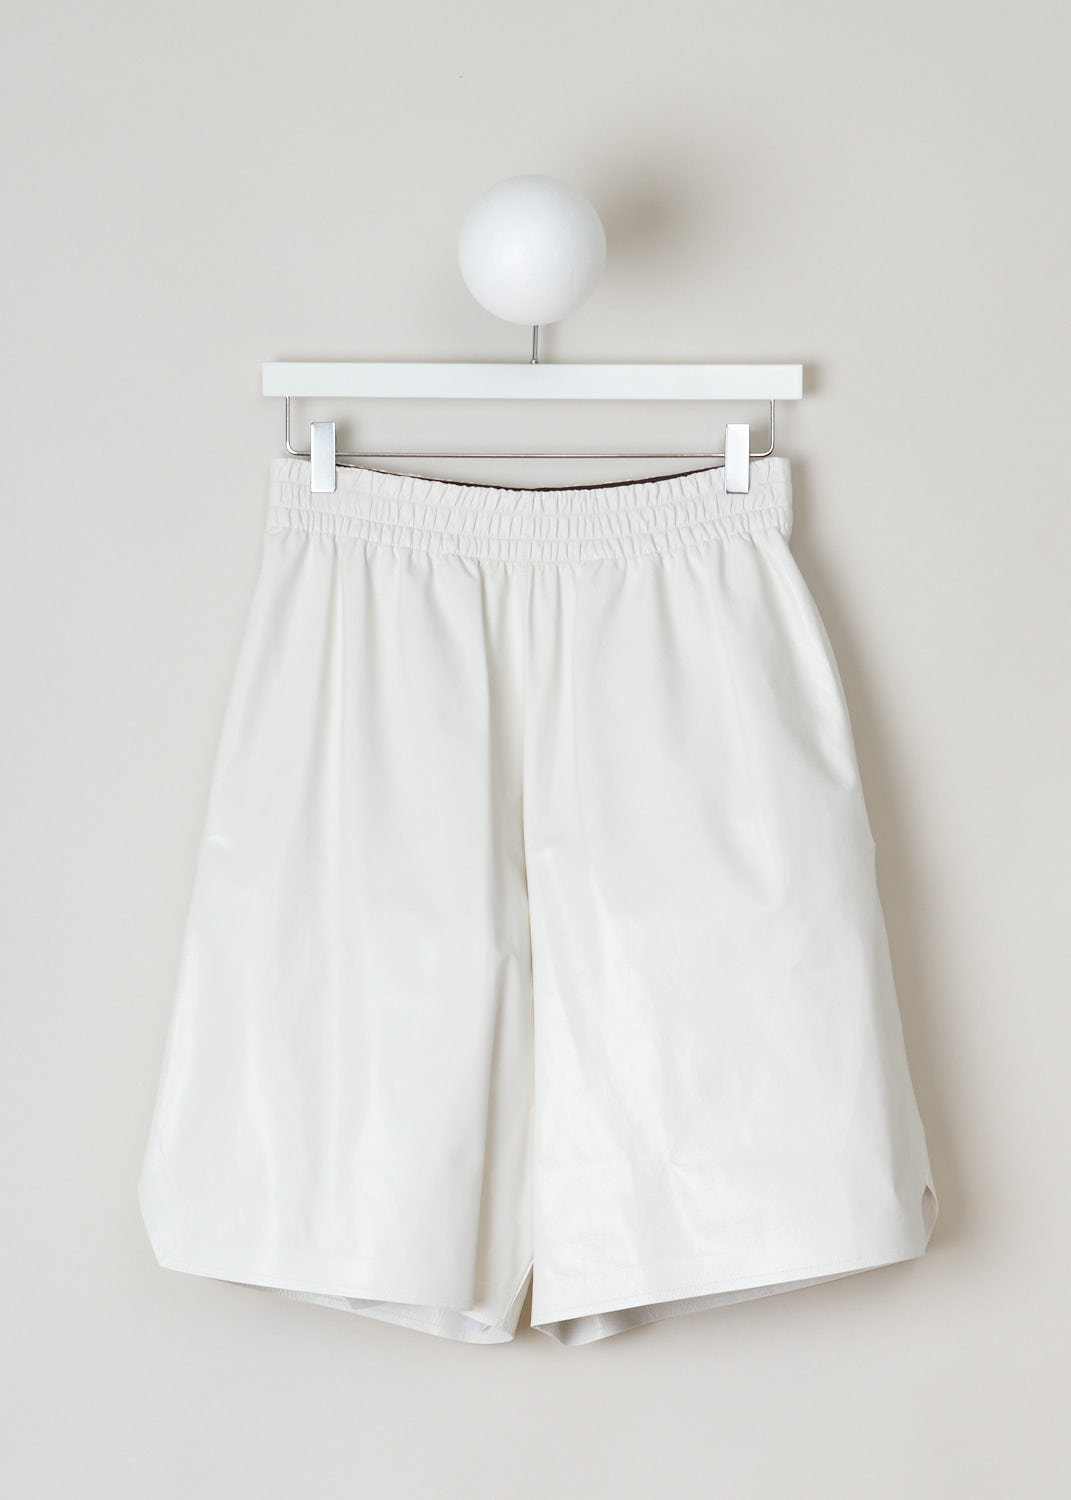 Bottega Veneta, White patent leather shorts, 633445_VKLC0_9068, white, front, these shorts made from white shiny leather. Featuring an oversized fit with the slip-in pockets being on the side seam, the elastic waistband acts as you fastening method on this model. 